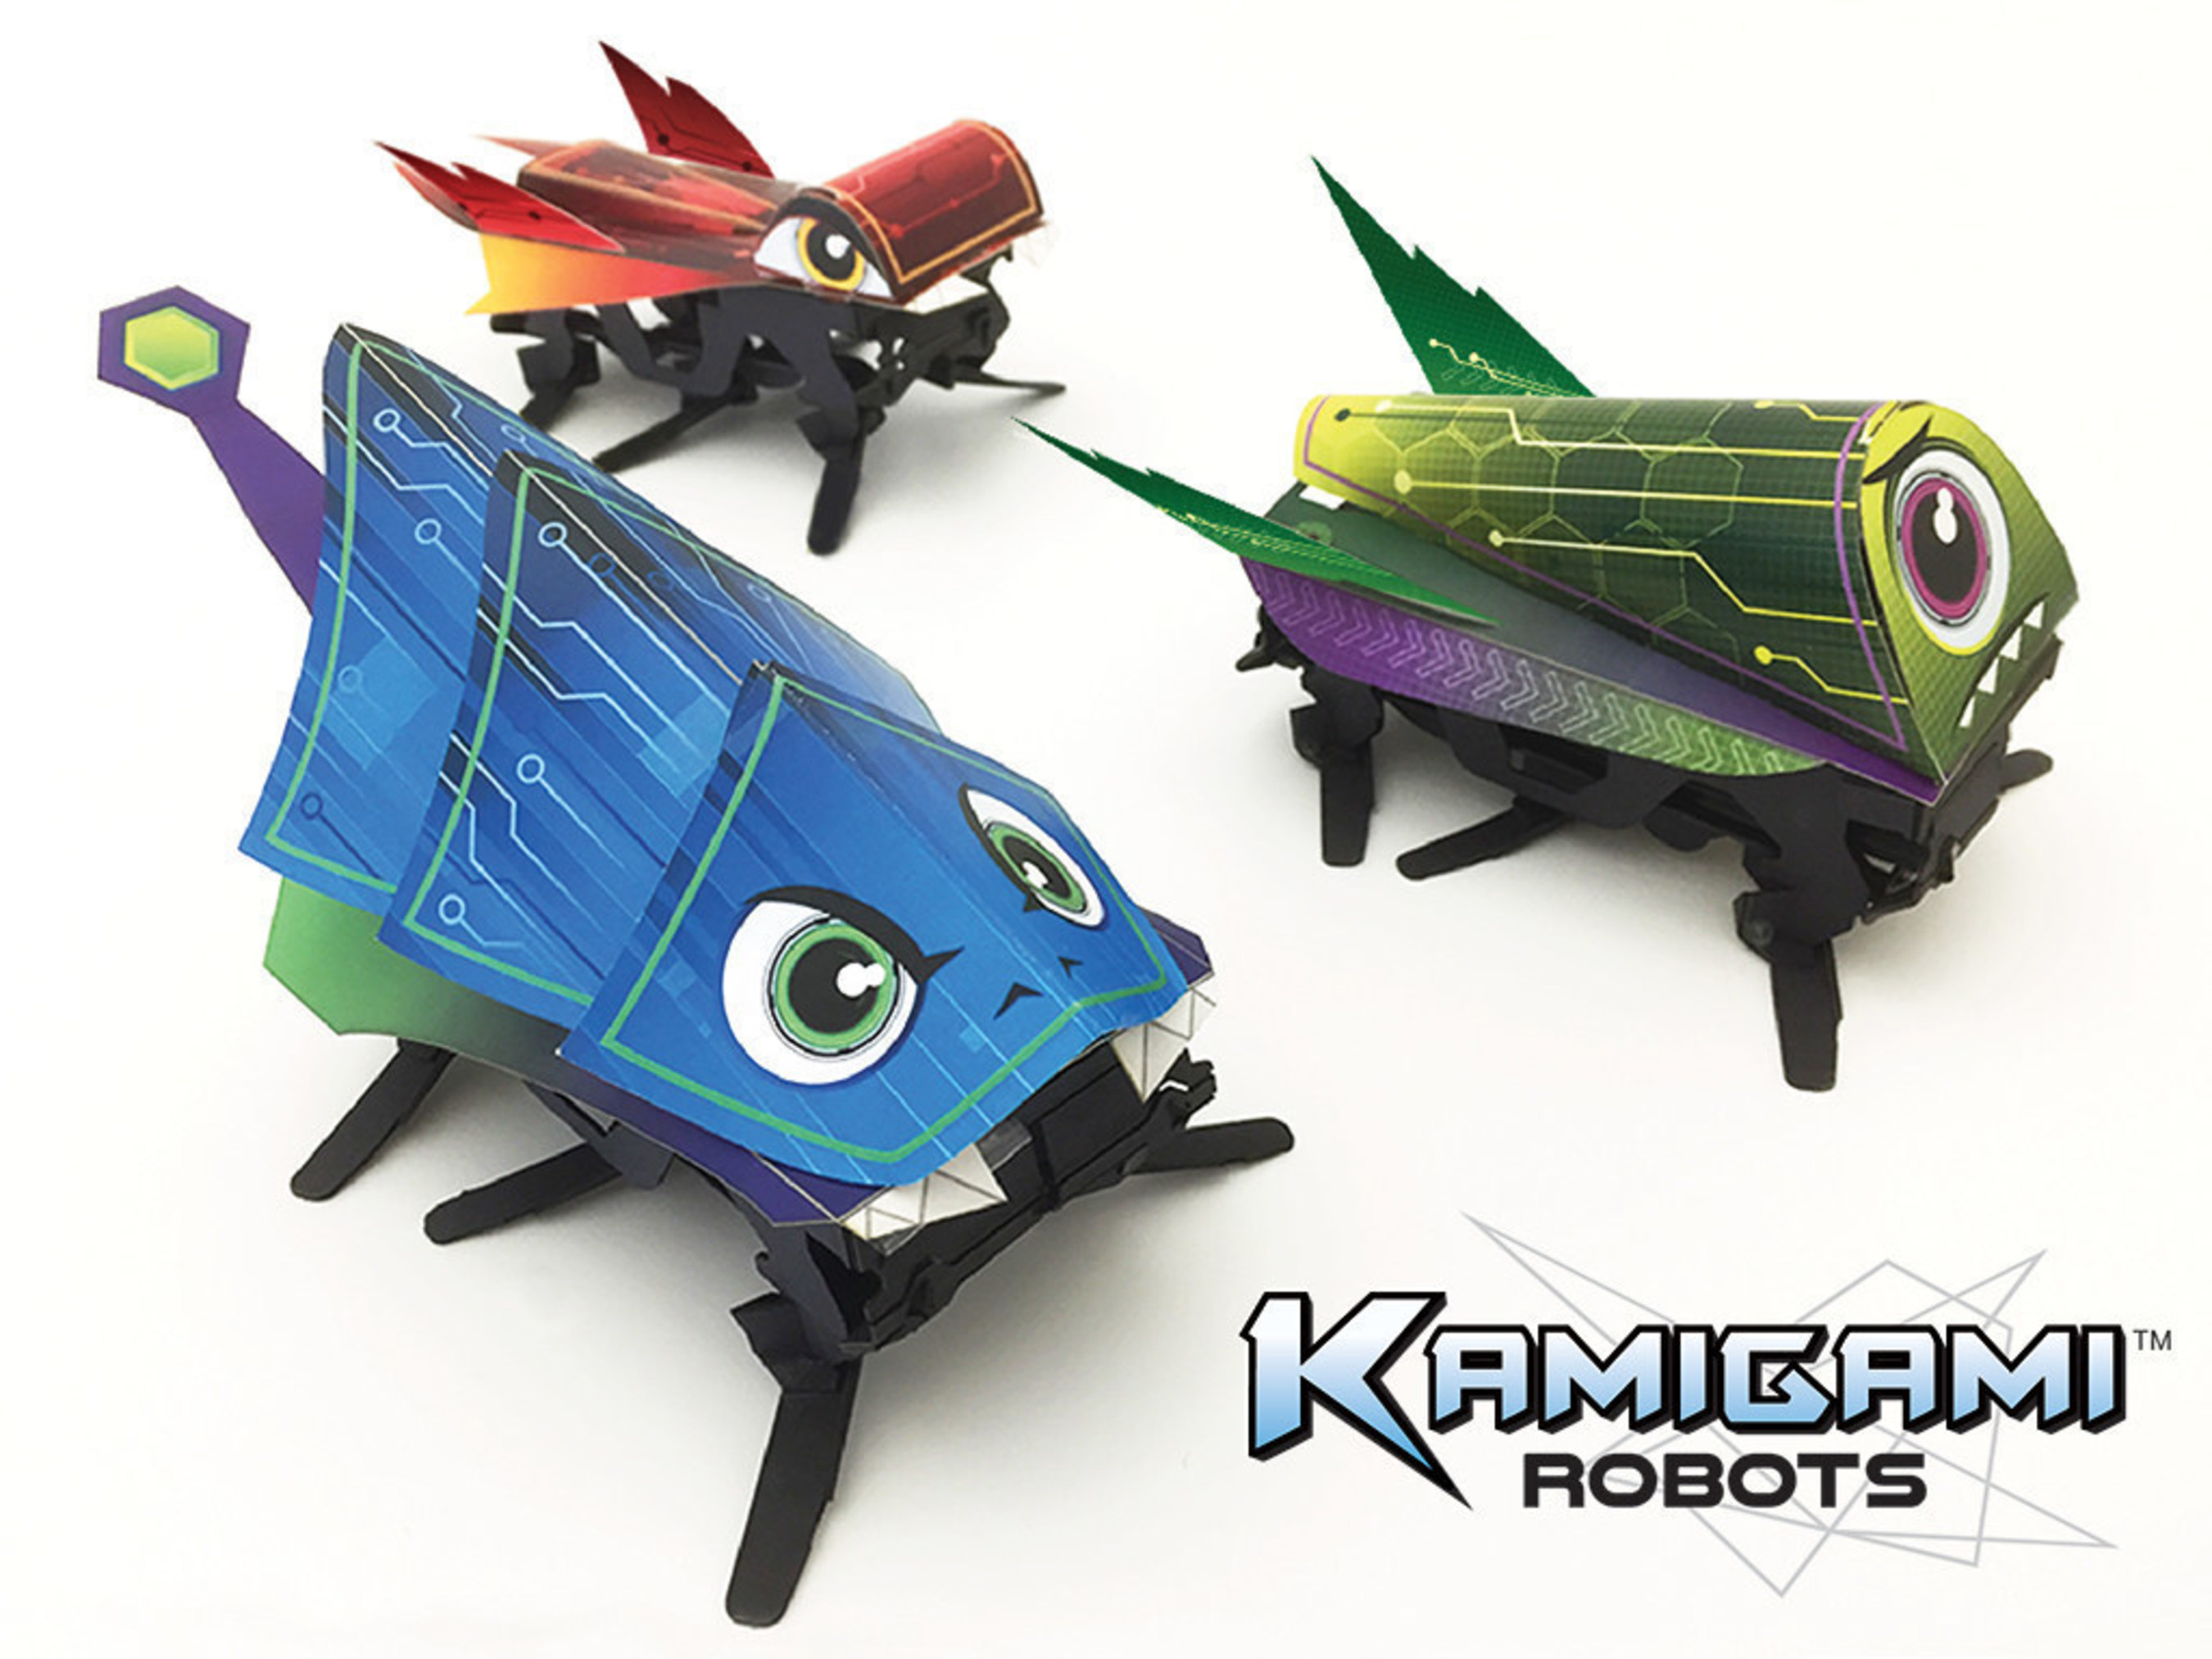 Kamigami: The world's first origami-style robot. Lightning fast, controlled with a smartphone, and fits in the palm of your hand.